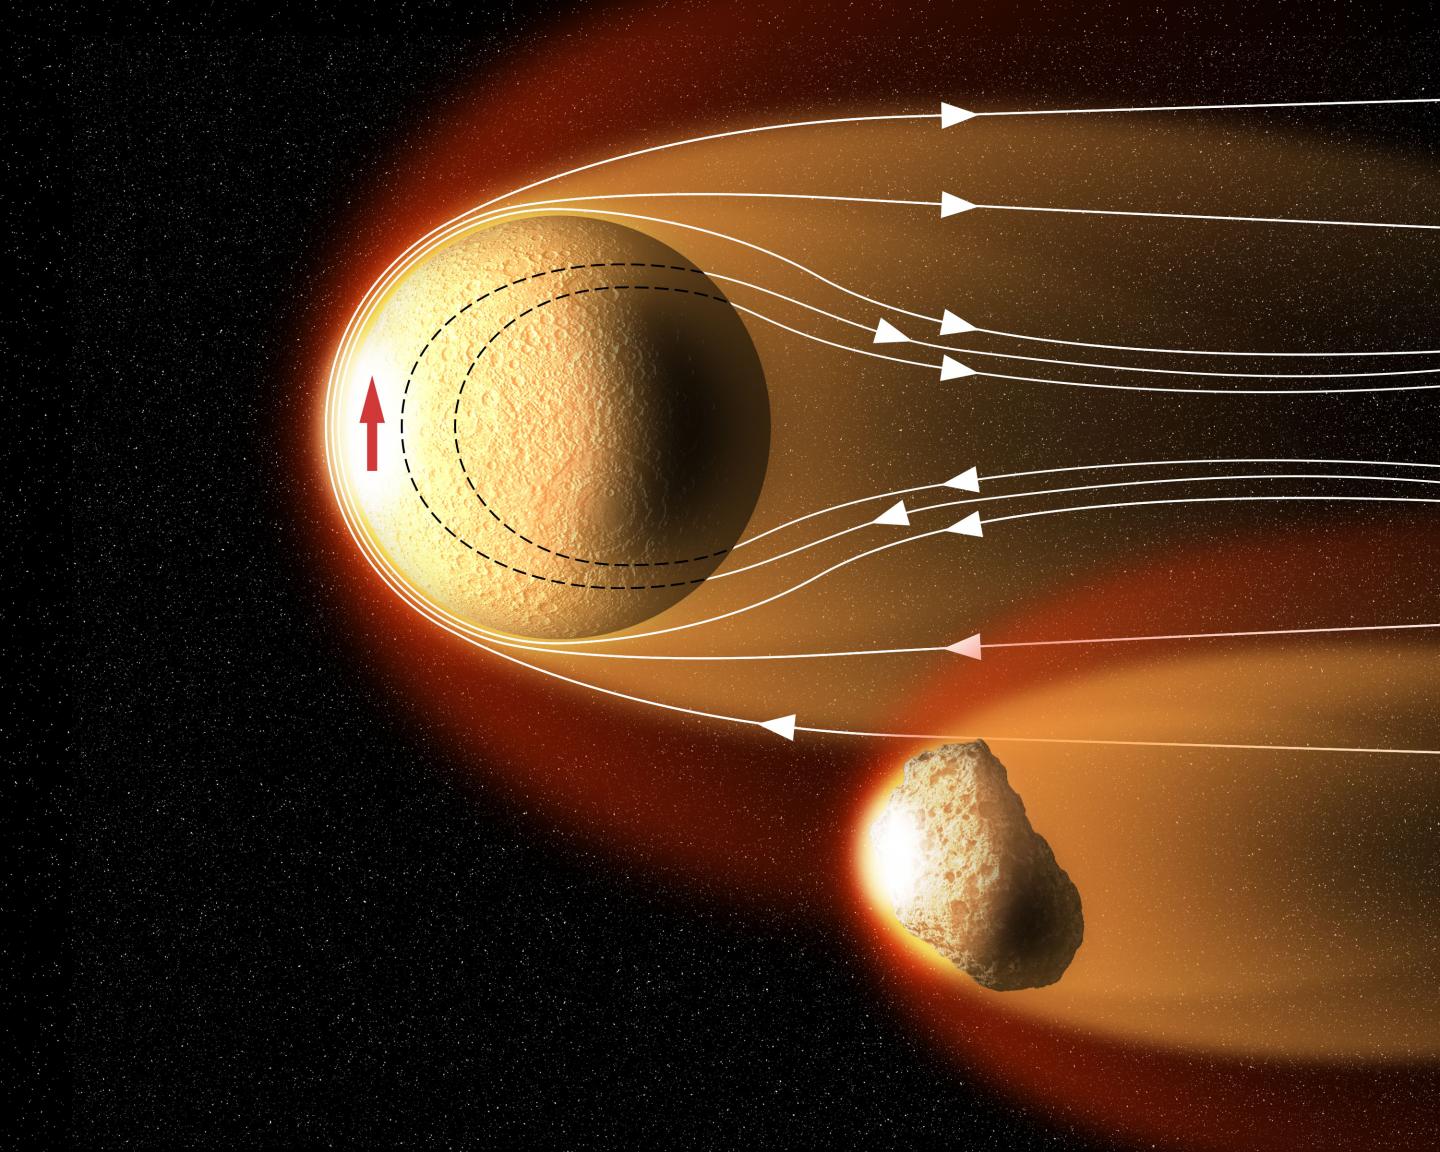 Solar wind flowing over asteroids in the early solar system